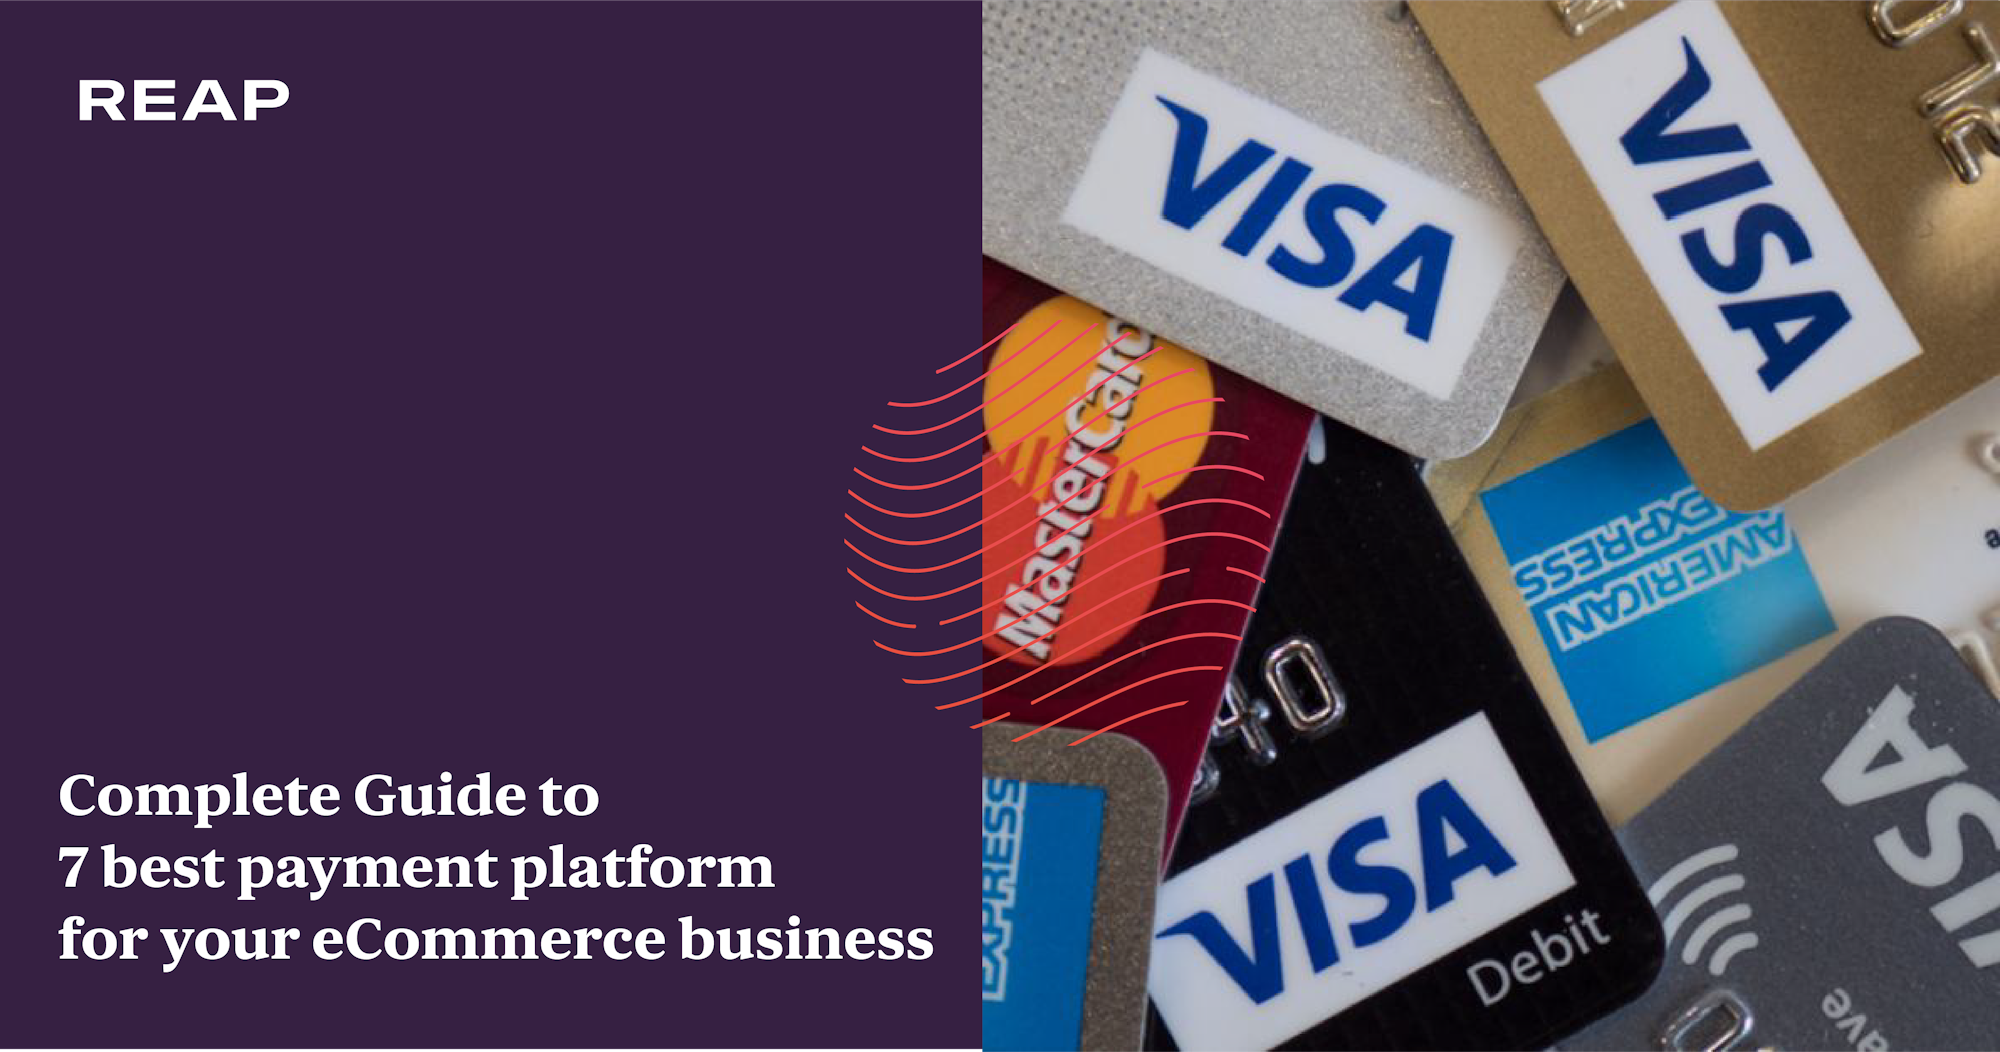 Cover Image for Complete Guide to 7 best payment platforms for your eCommerce business